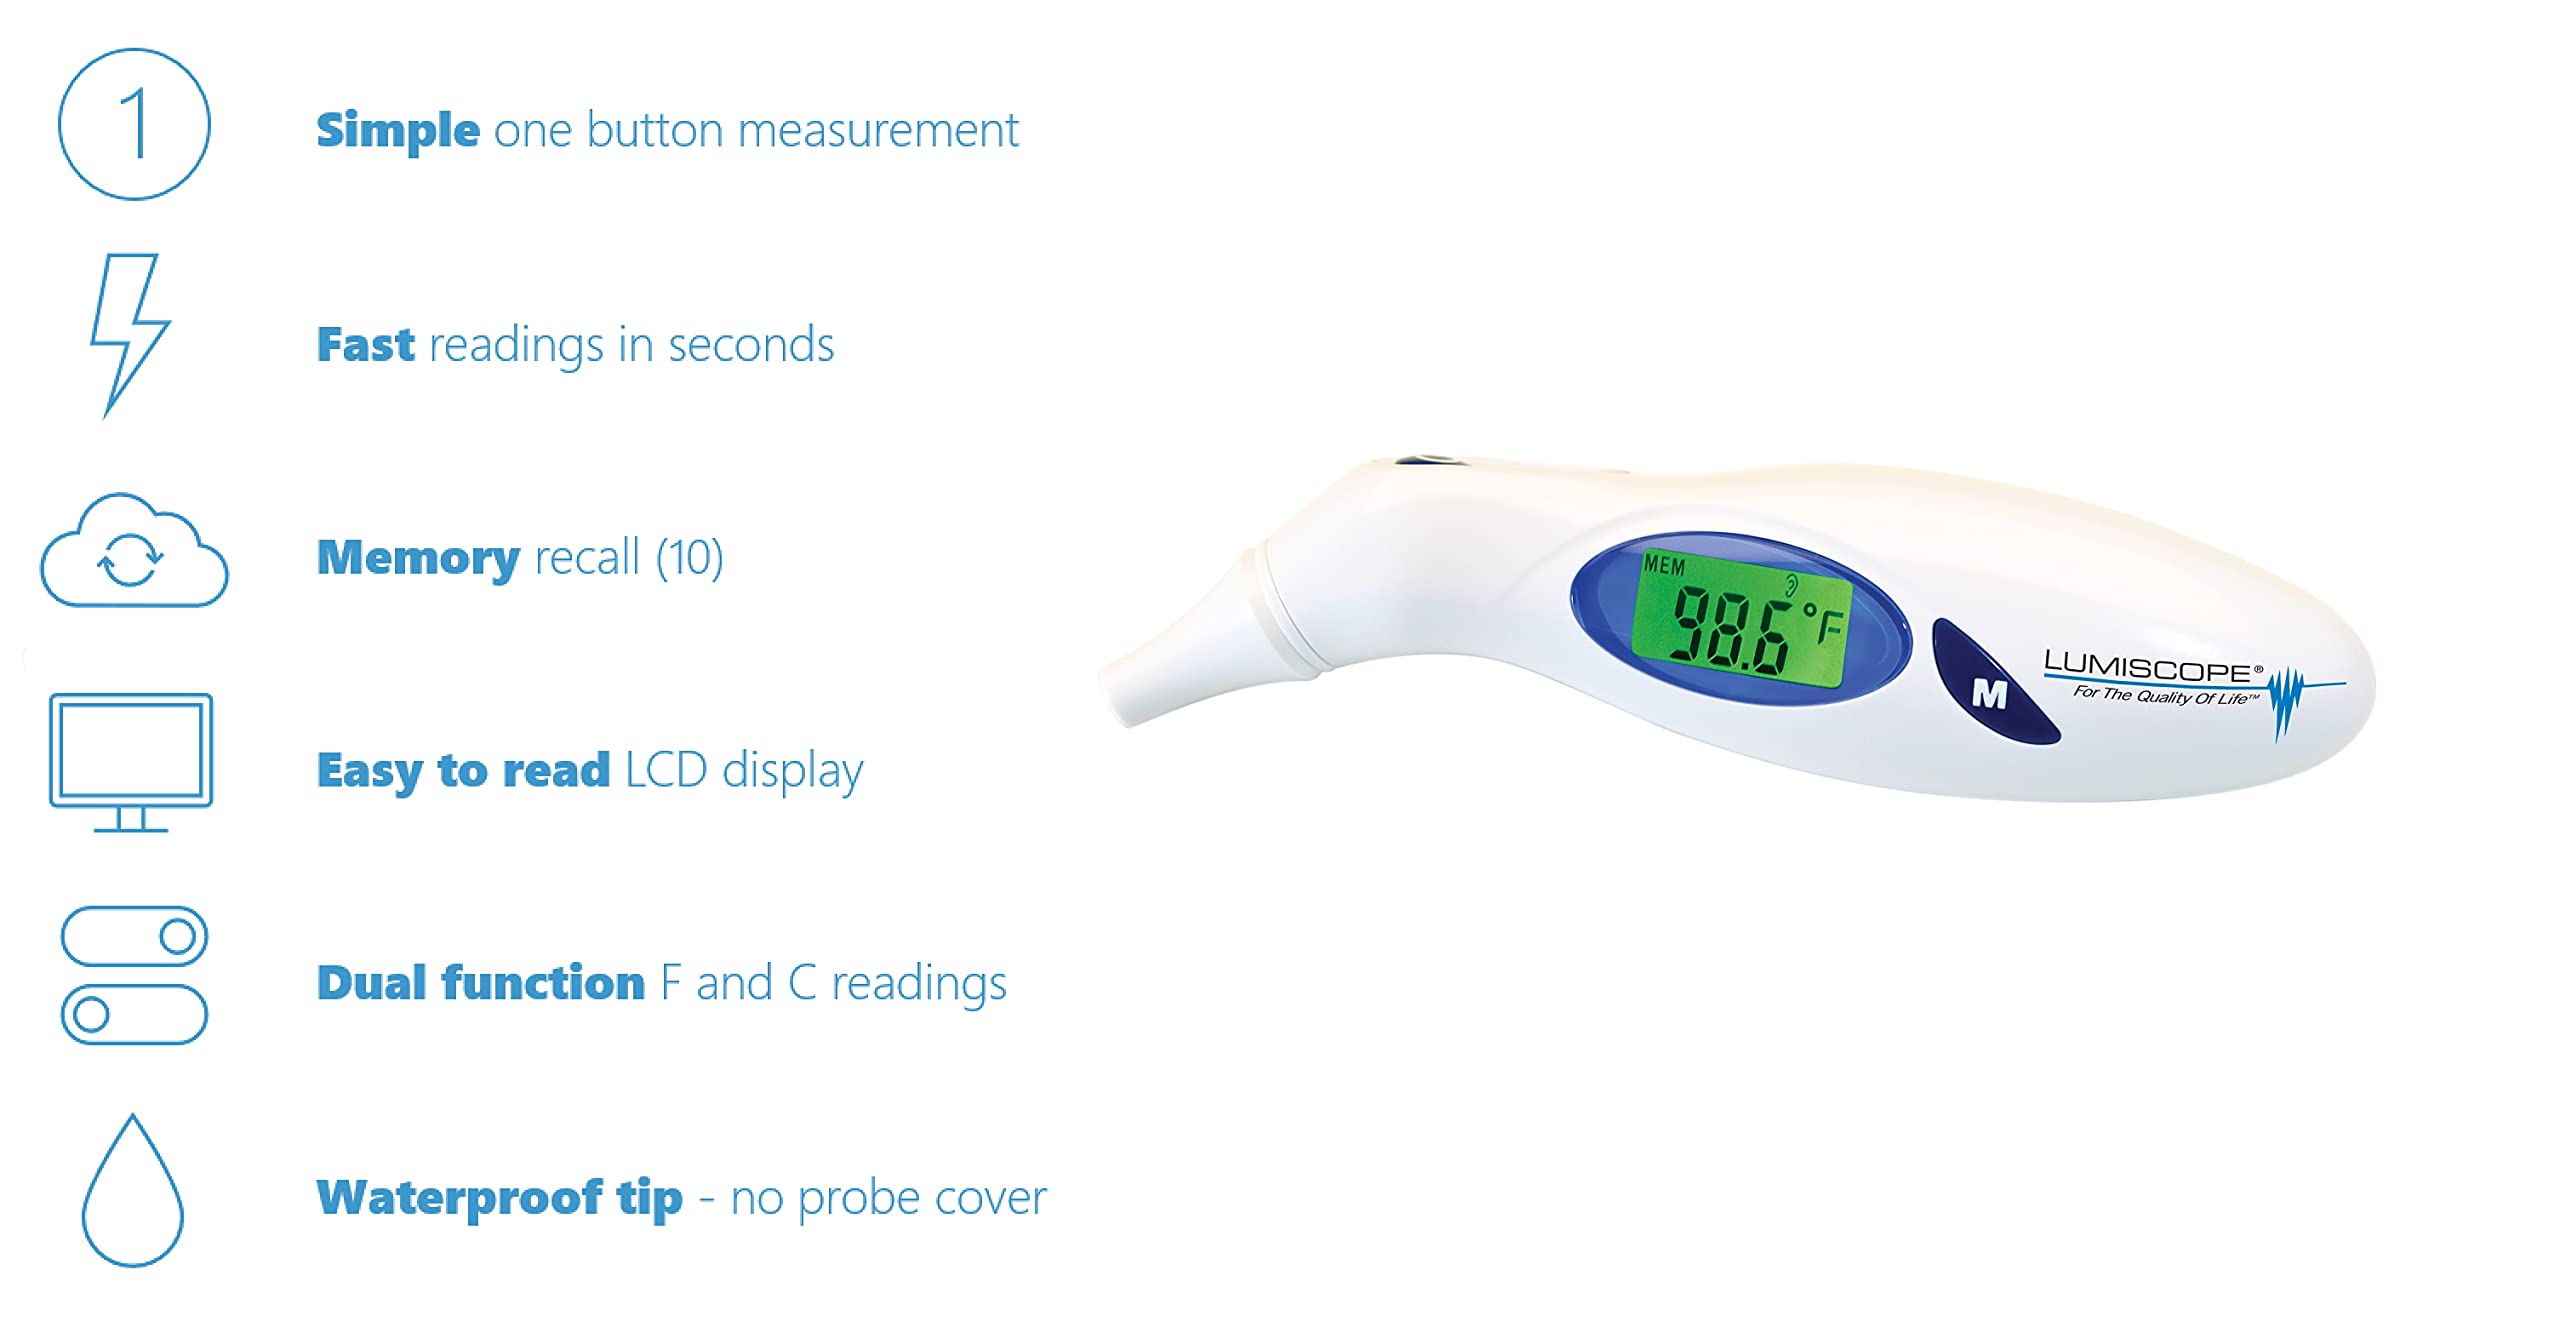 Graham-Field Lumiscope 2215 Digital Ear Thermometer, White